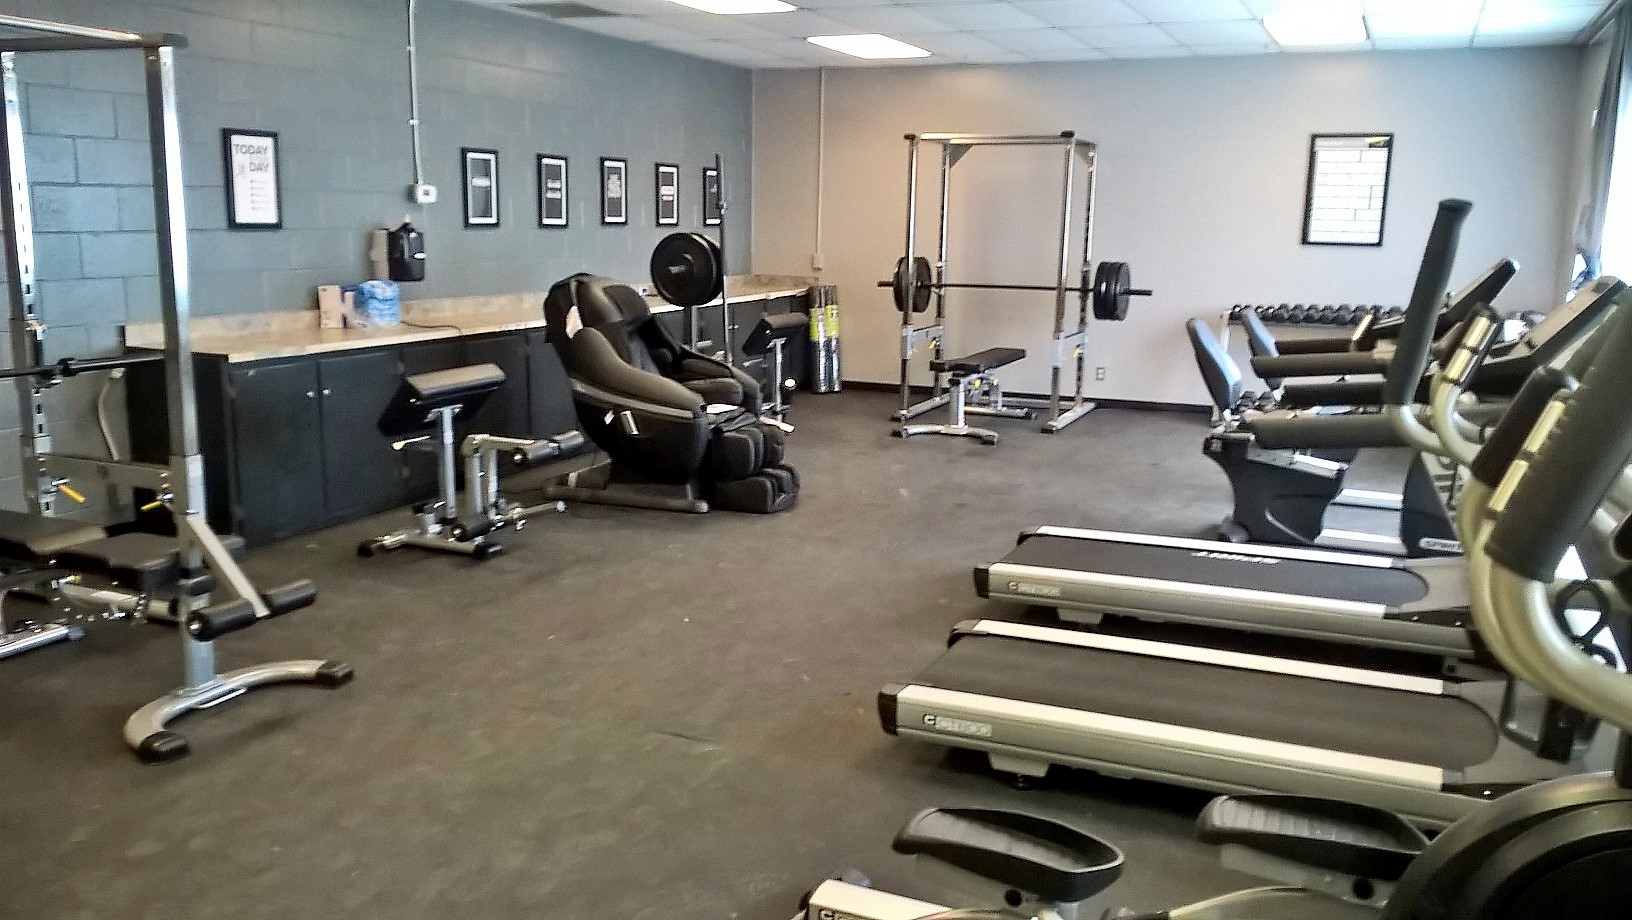 Exercise equipment in a large room.